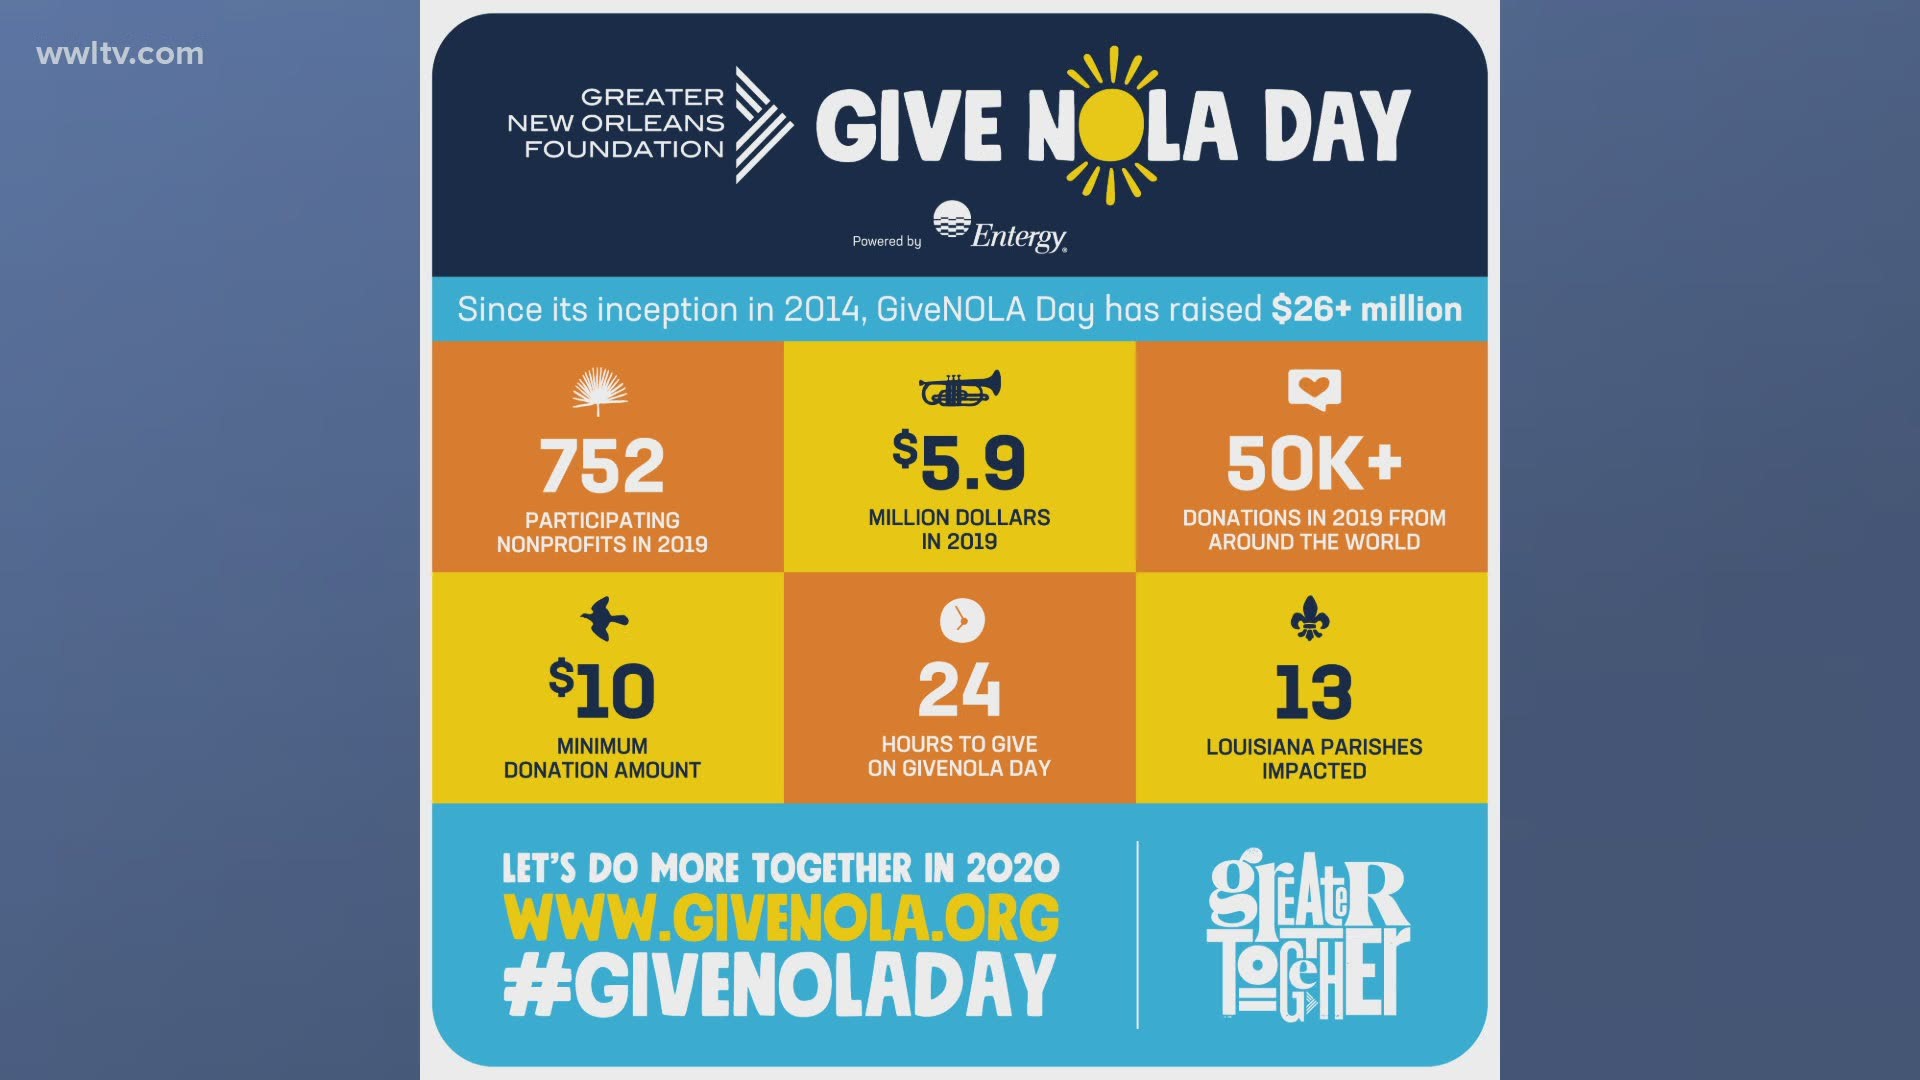 Charles Beasley and Christy Ross with Baptist Community Ministries talk about what GiveNOLA means for their mission to support non-profit partners around N.O.